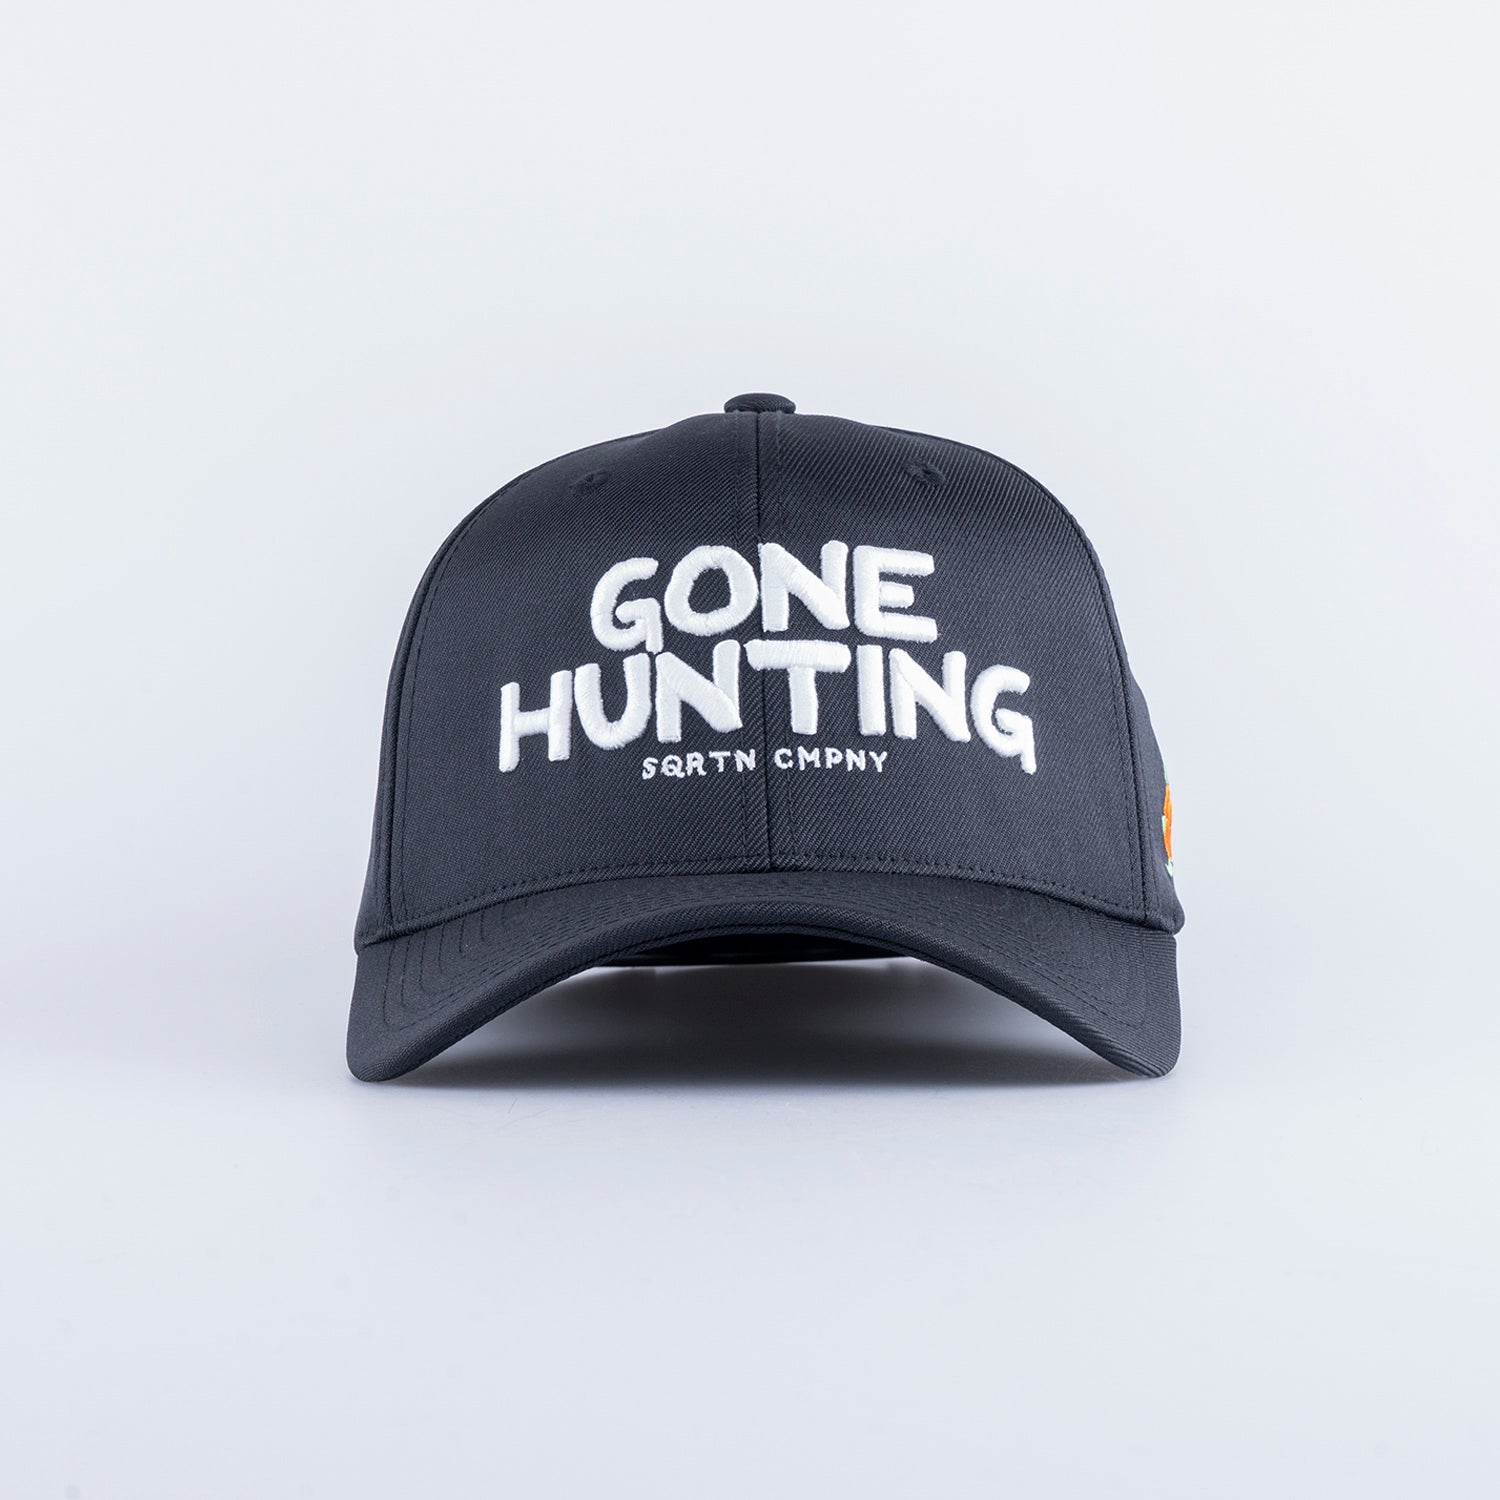 GONE HUNTING COMPACT 120 KEPS - BLACK